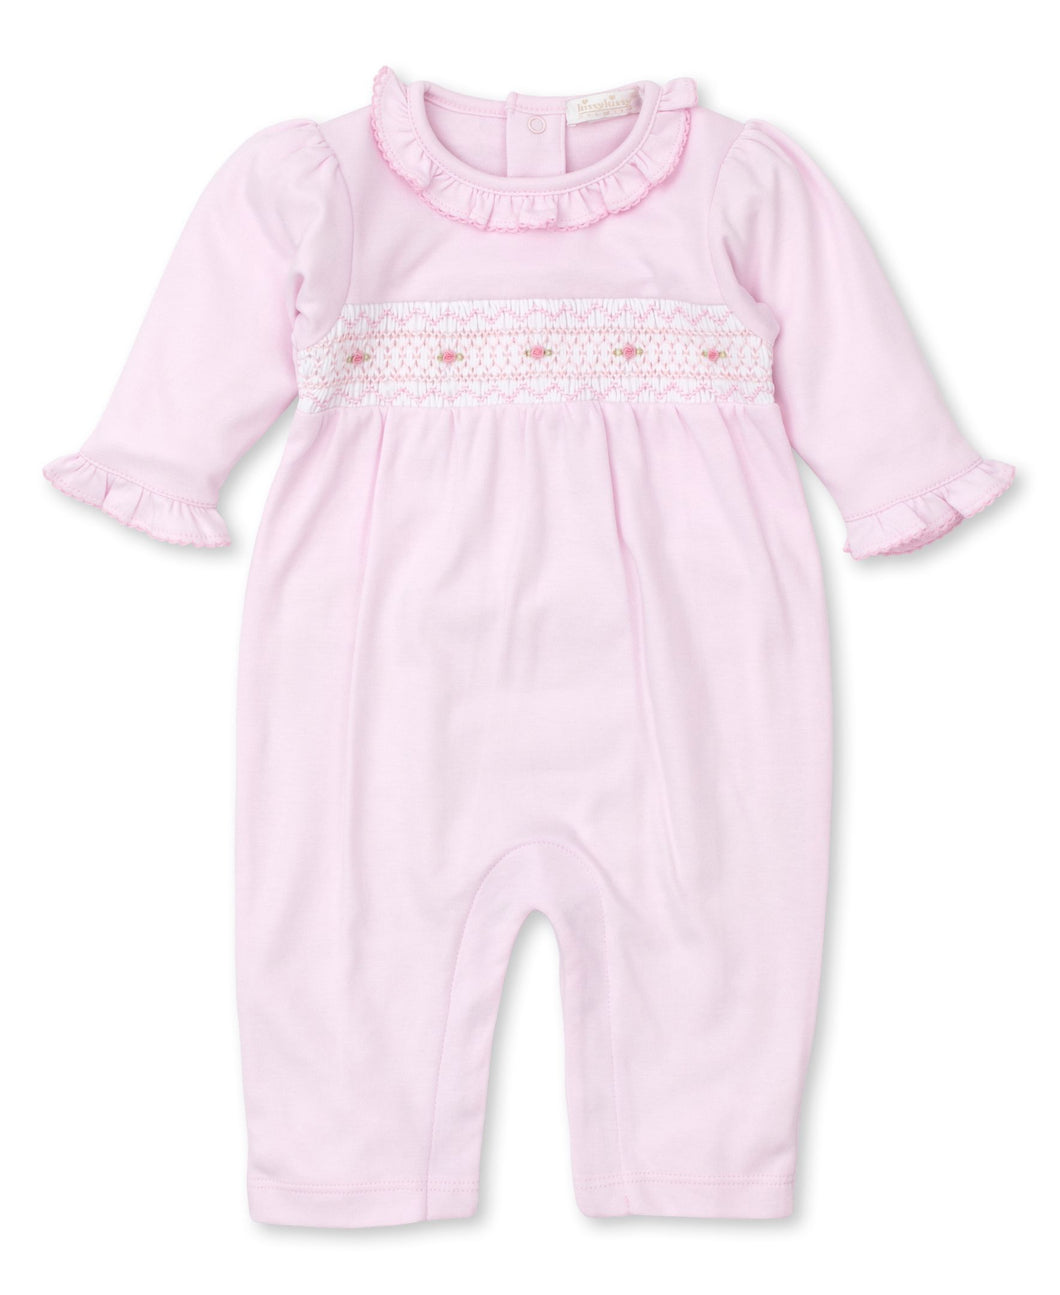 CLB Fall 21 Playsuit w/ Hand Smk - Pink